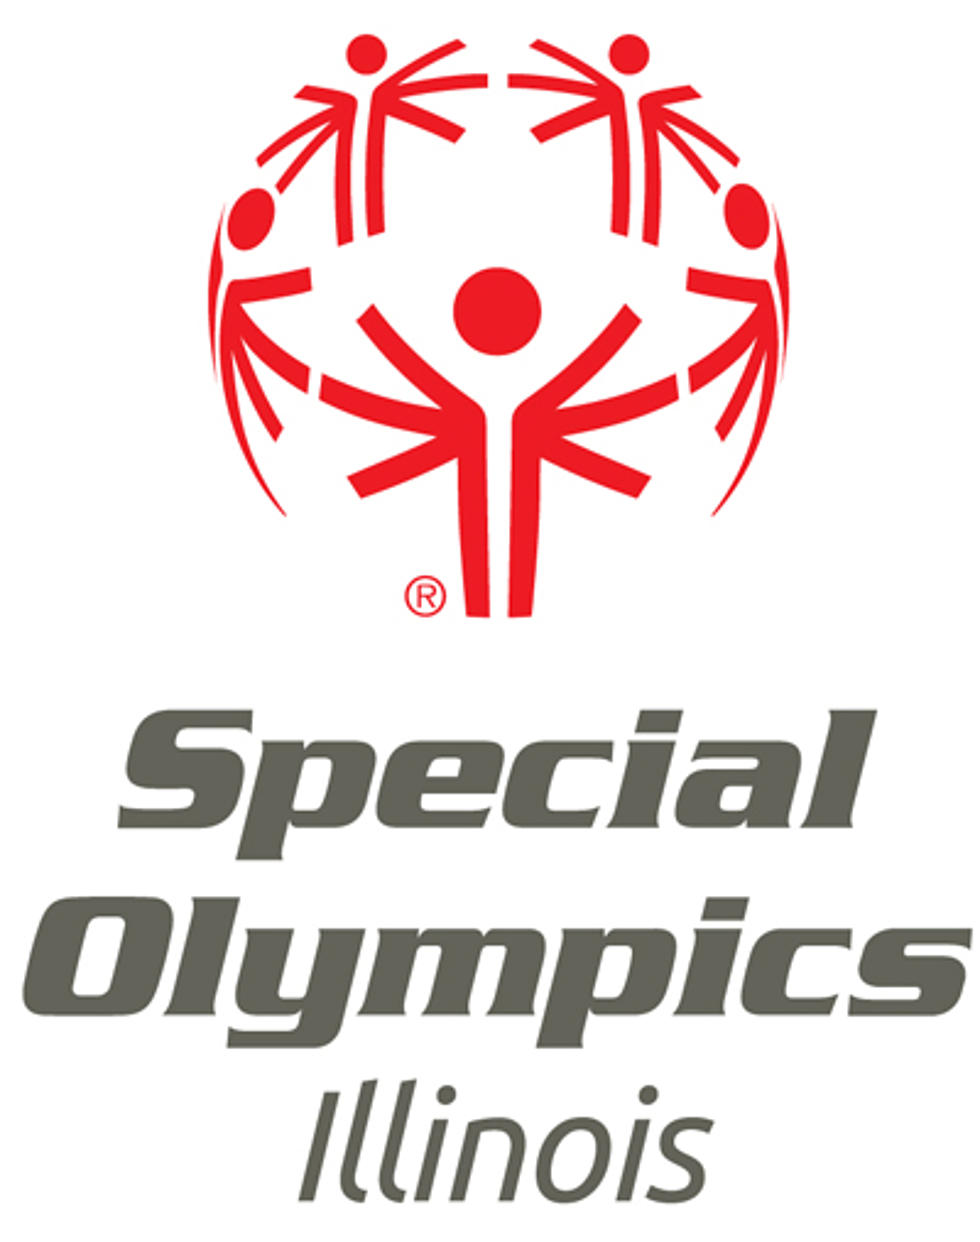 Rockford Athlete Heads to Special Olympics World Games